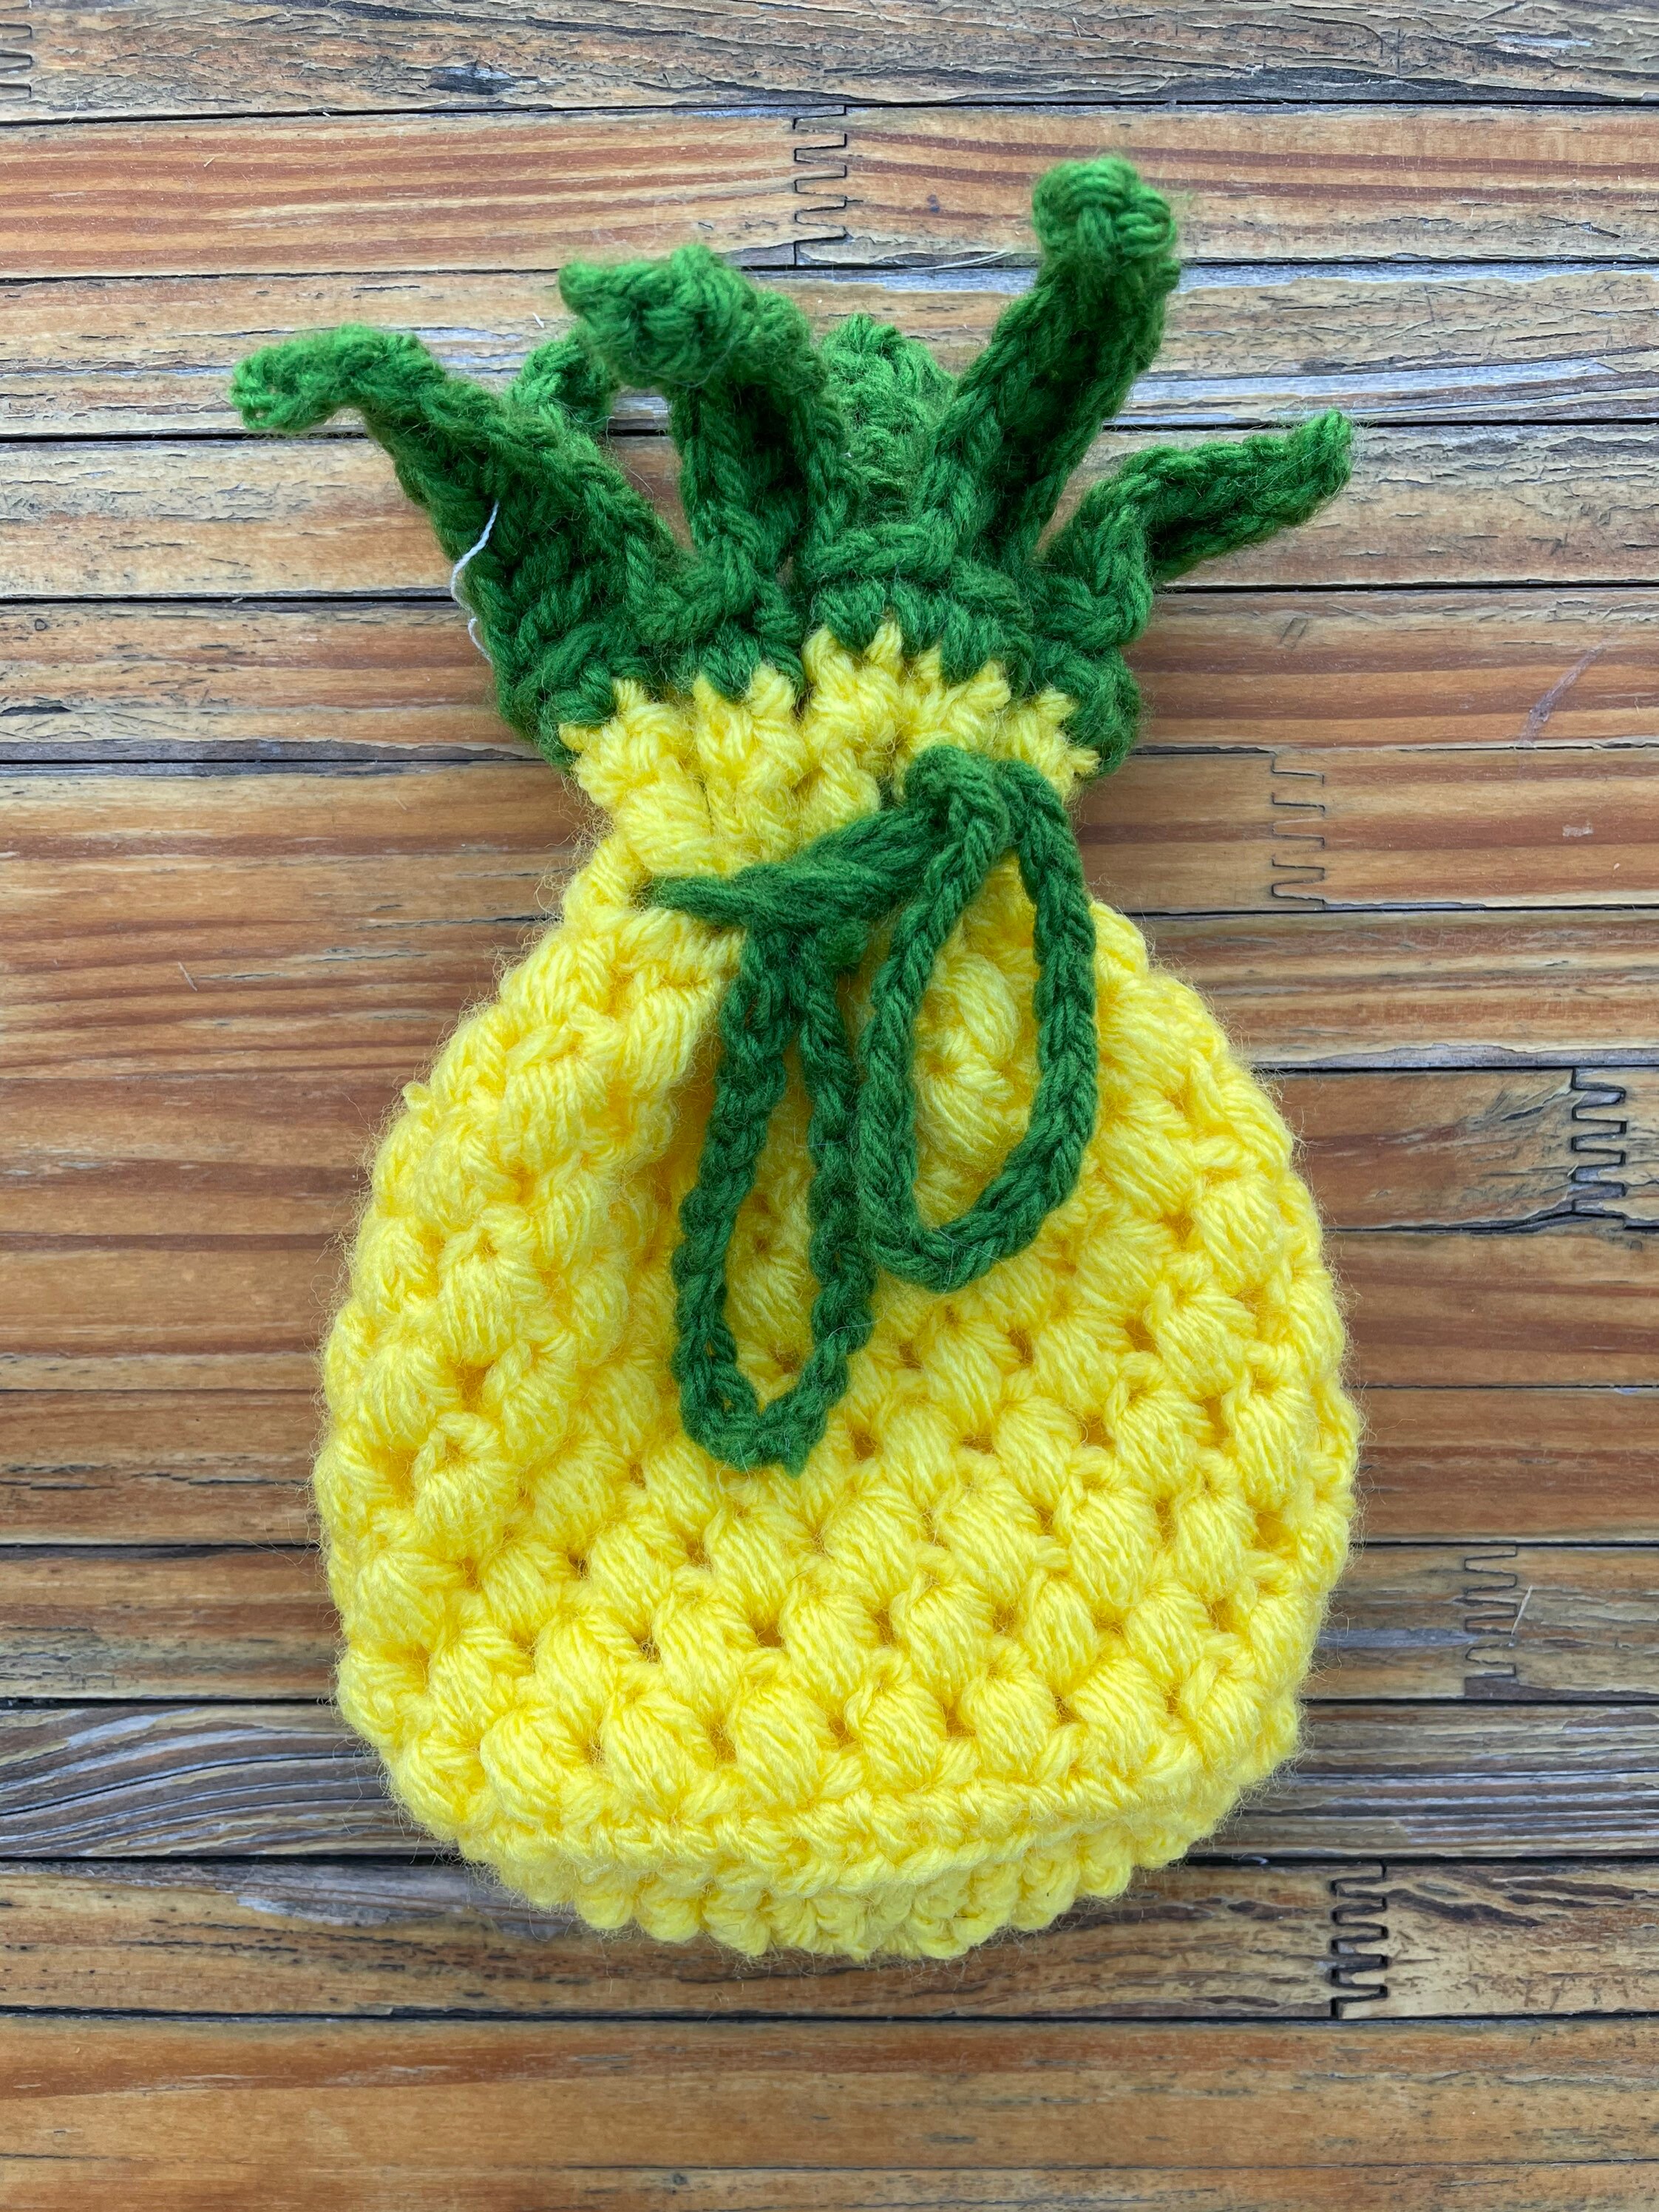 Drawstring Pineapple Bag, Tropical Style Travel Bags, Fully Lined Cotton  Canvas Laundry Bag, Drawstring Craft Bags, Sewing Crochet Knit Bags 